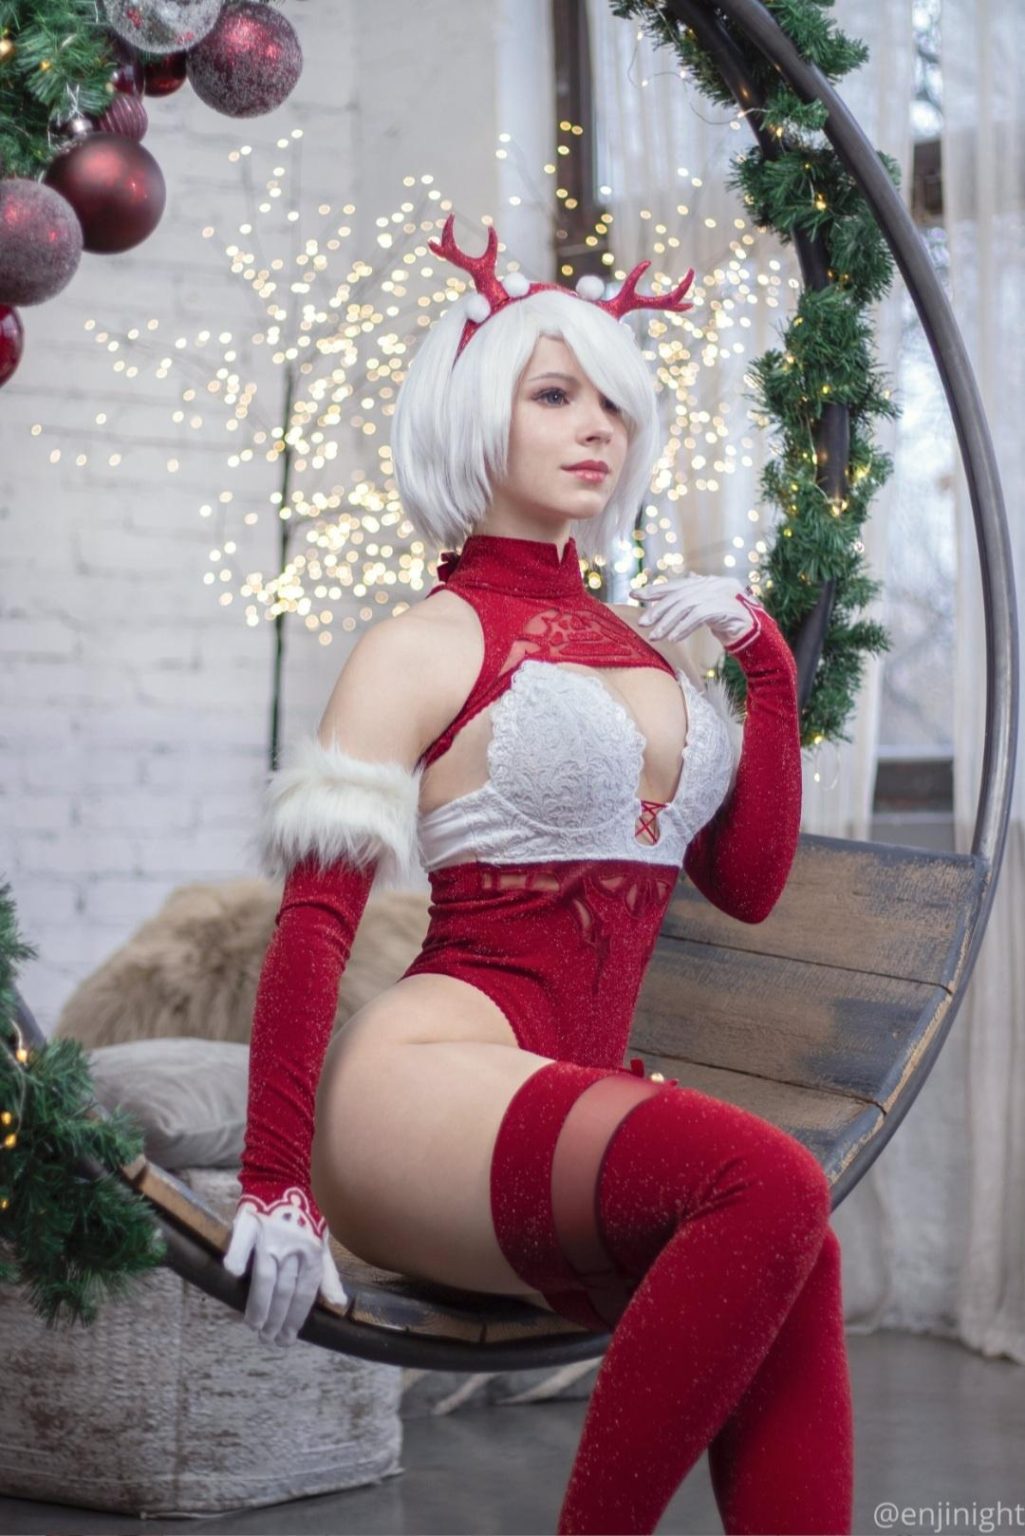 Enji Night Lingerie Xmas 2B Cosplay Onlyfans Set Leaked TheS